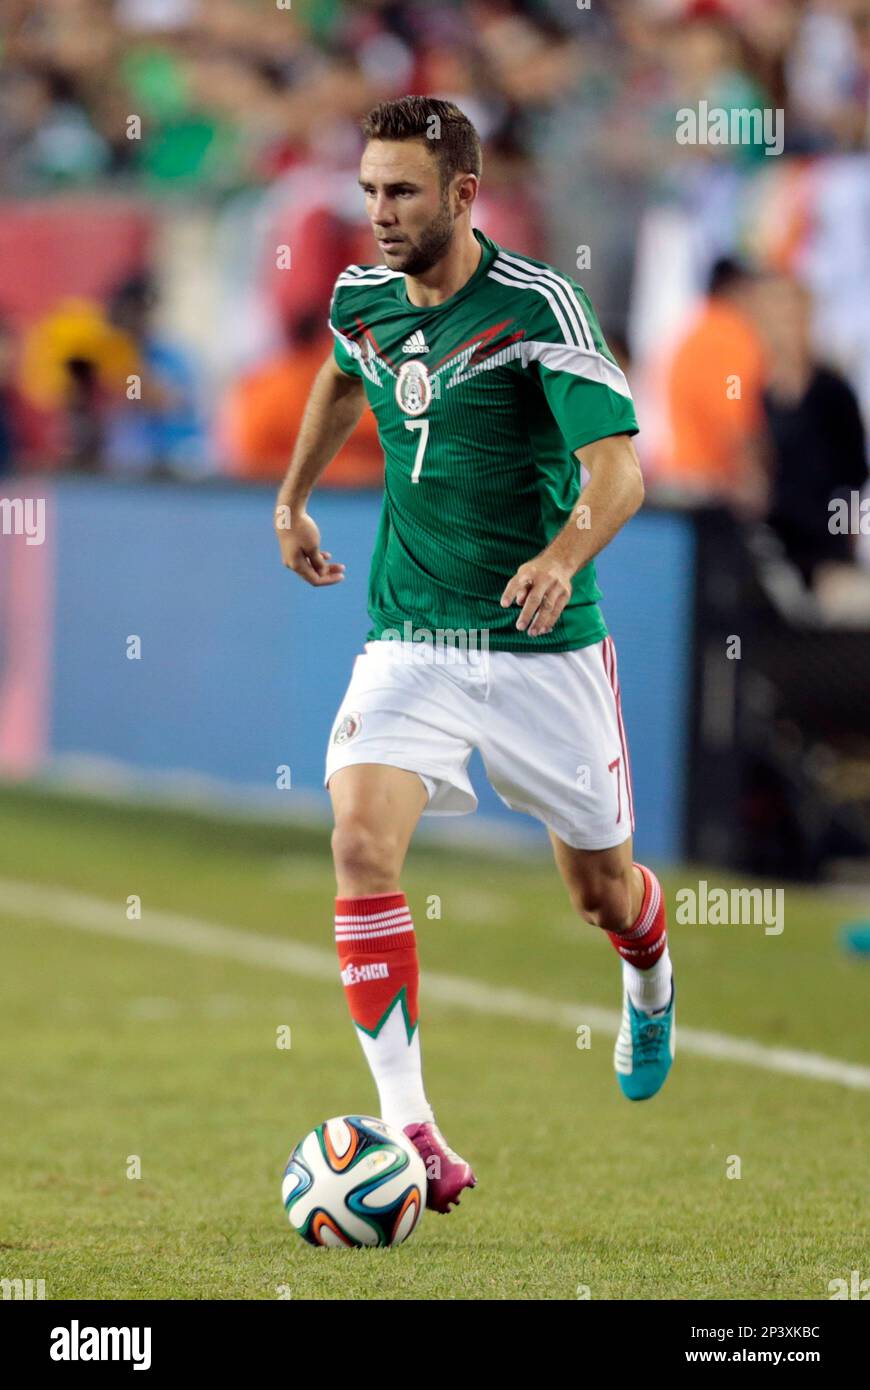 June 6, 2014: Mexico's Miguel Layun (7). The men's national team of Portugal defeated the men's national team of Mexico 1-0 in a final international friendly before the 2014 FIFA World Cup at Gillette Stadium in Foxborough, Massachusetts. (Icon Sportswire via AP Images) Stock Photo